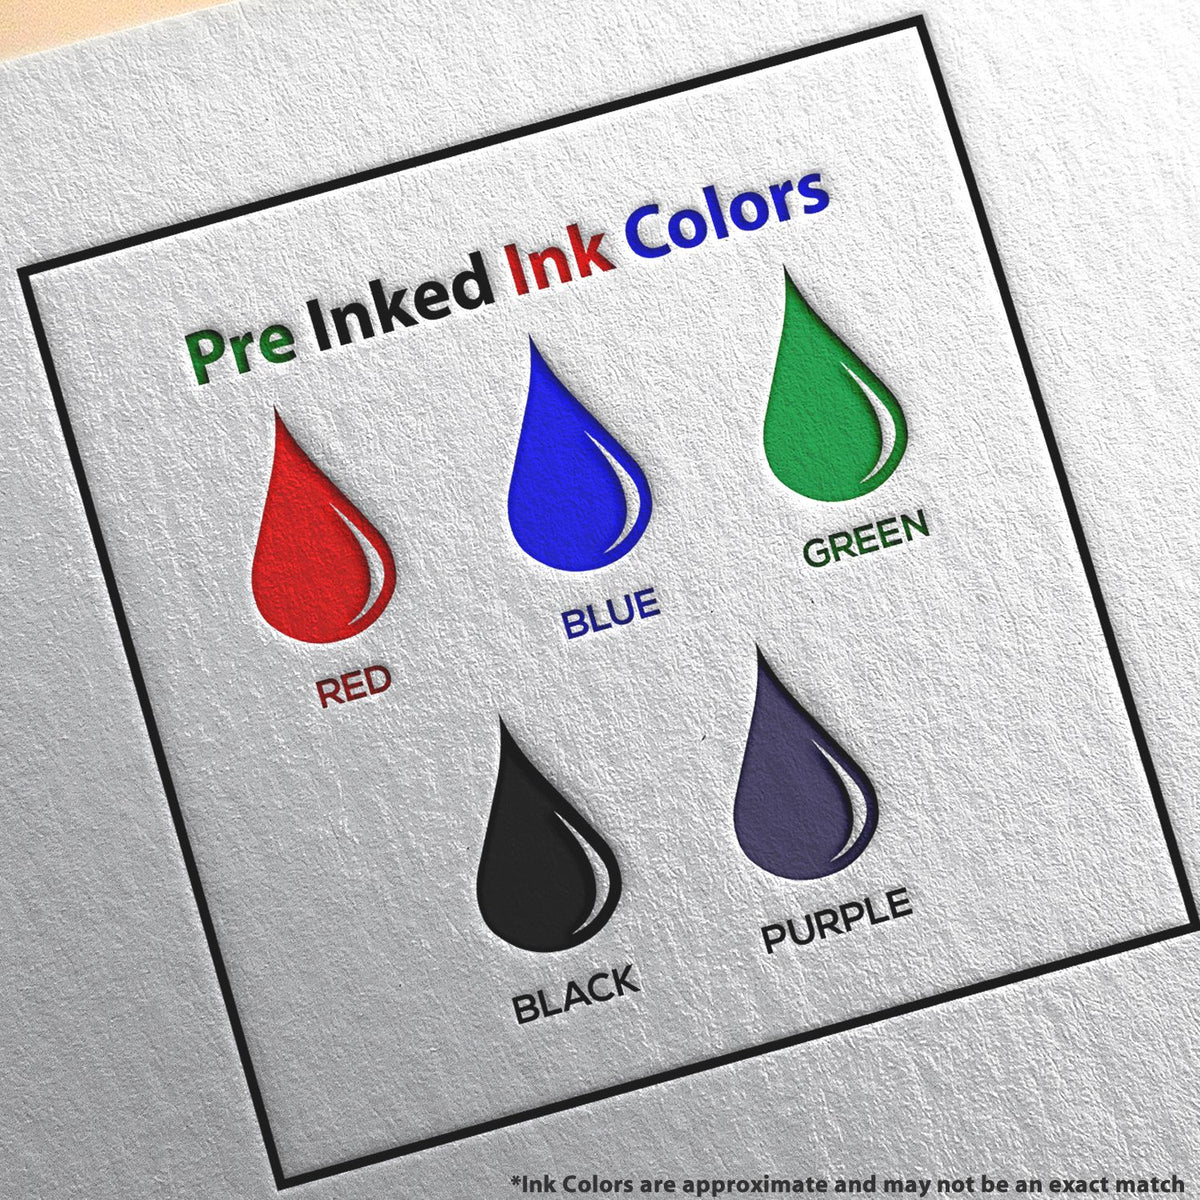 A picture showing the different ink colors or hues available for the MaxLight Premium Pre-Inked Puerto Rico Rectangular Notarial Stamp product.